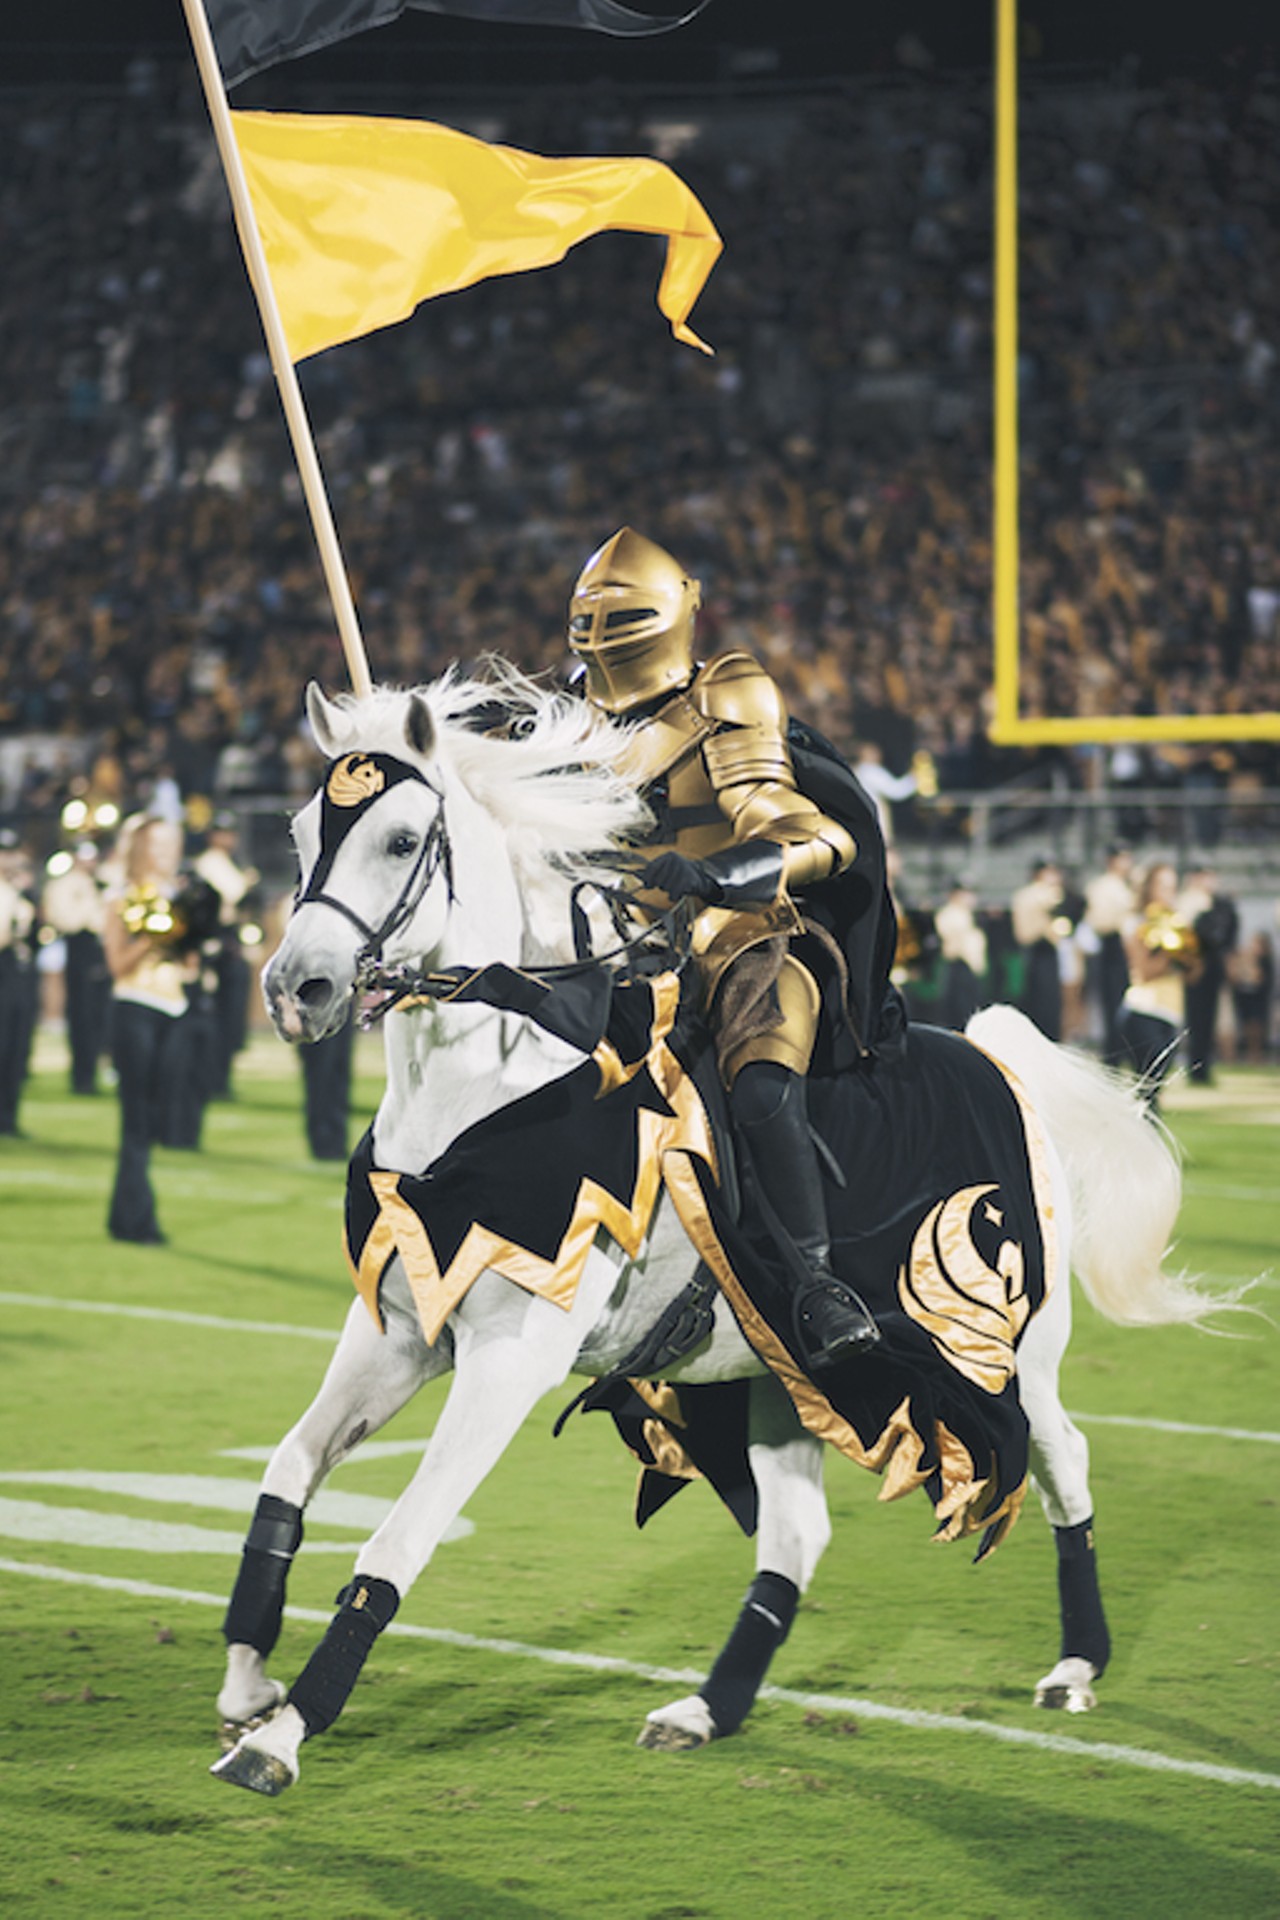 Photos from UCF's homecoming victory against the Houston Cougars